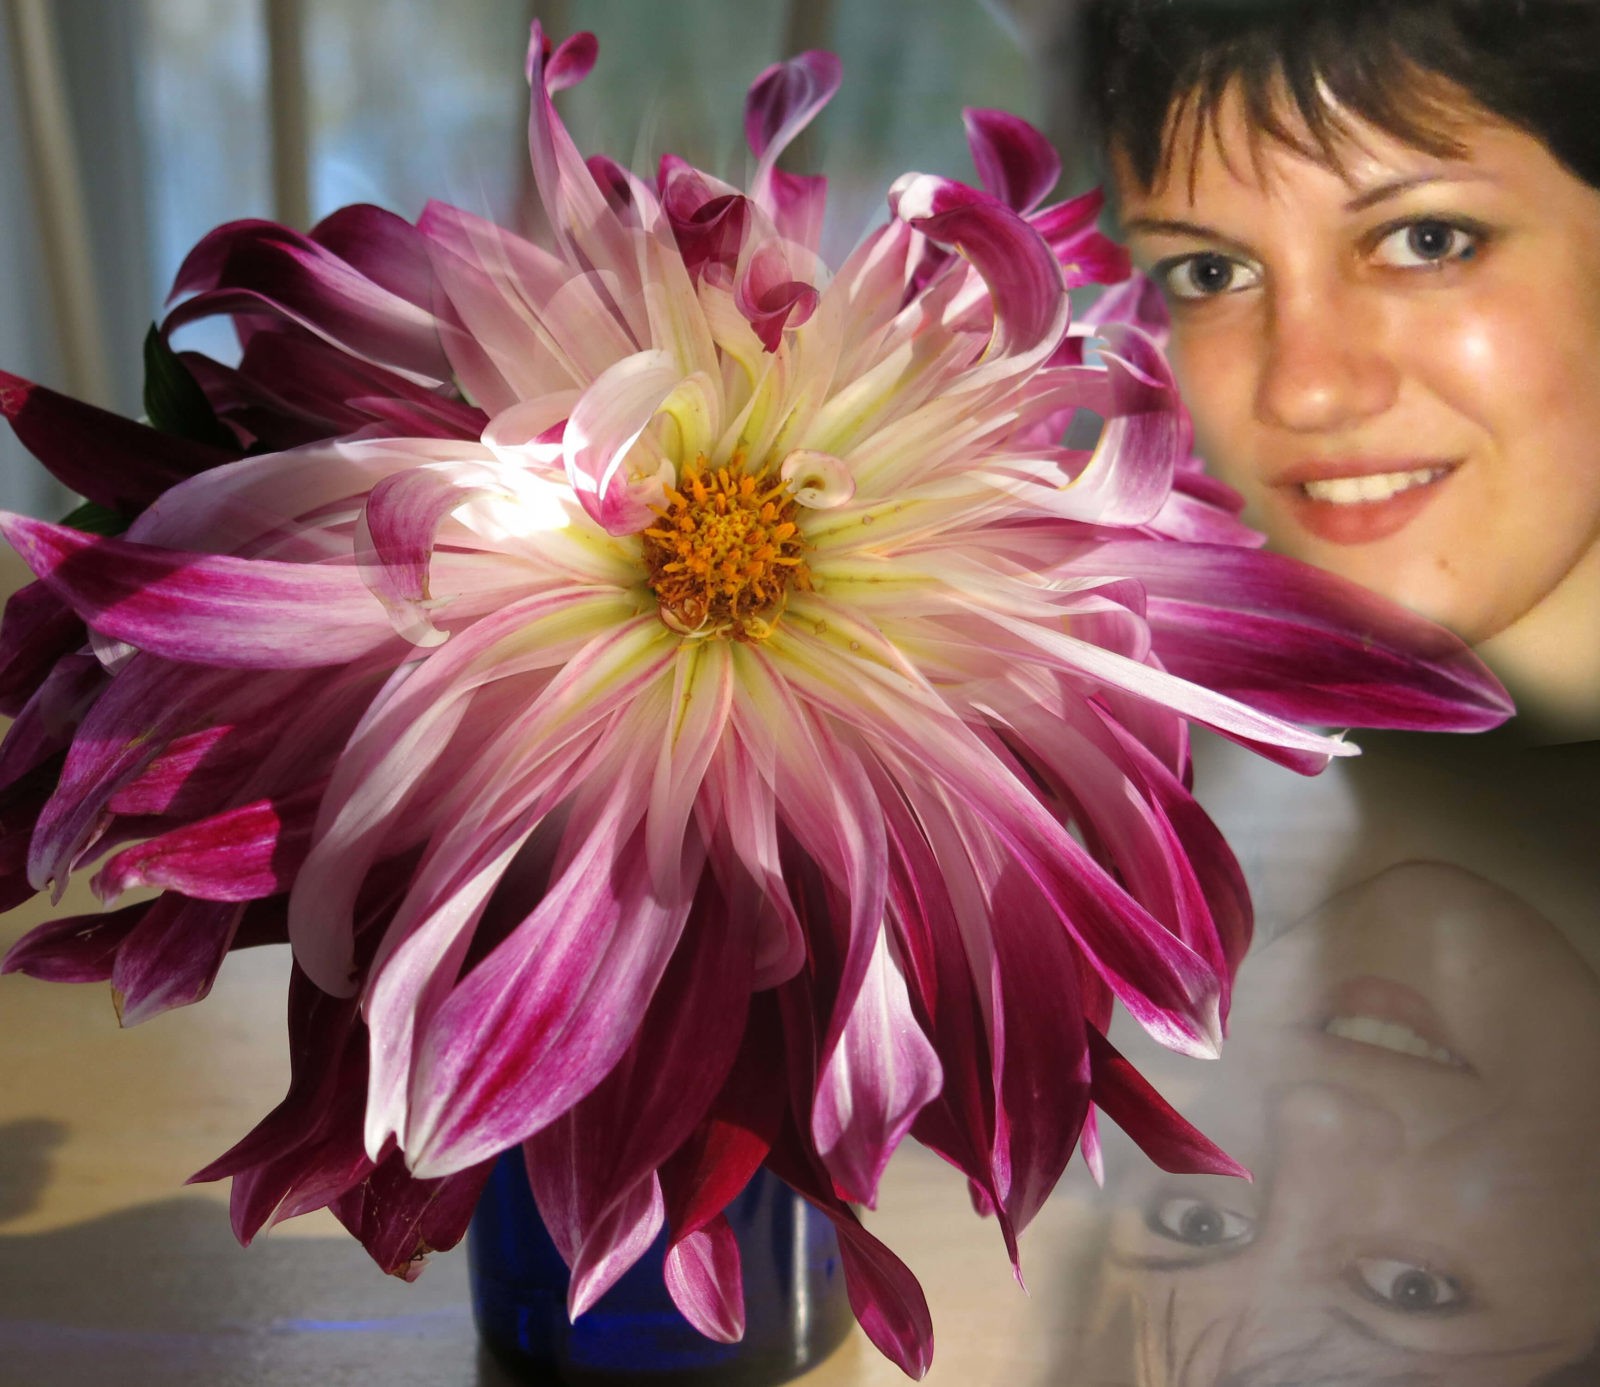 Images of Robin Botie's daughter, Marika Warden, photo-shopped with the last flower from Valentina's garden